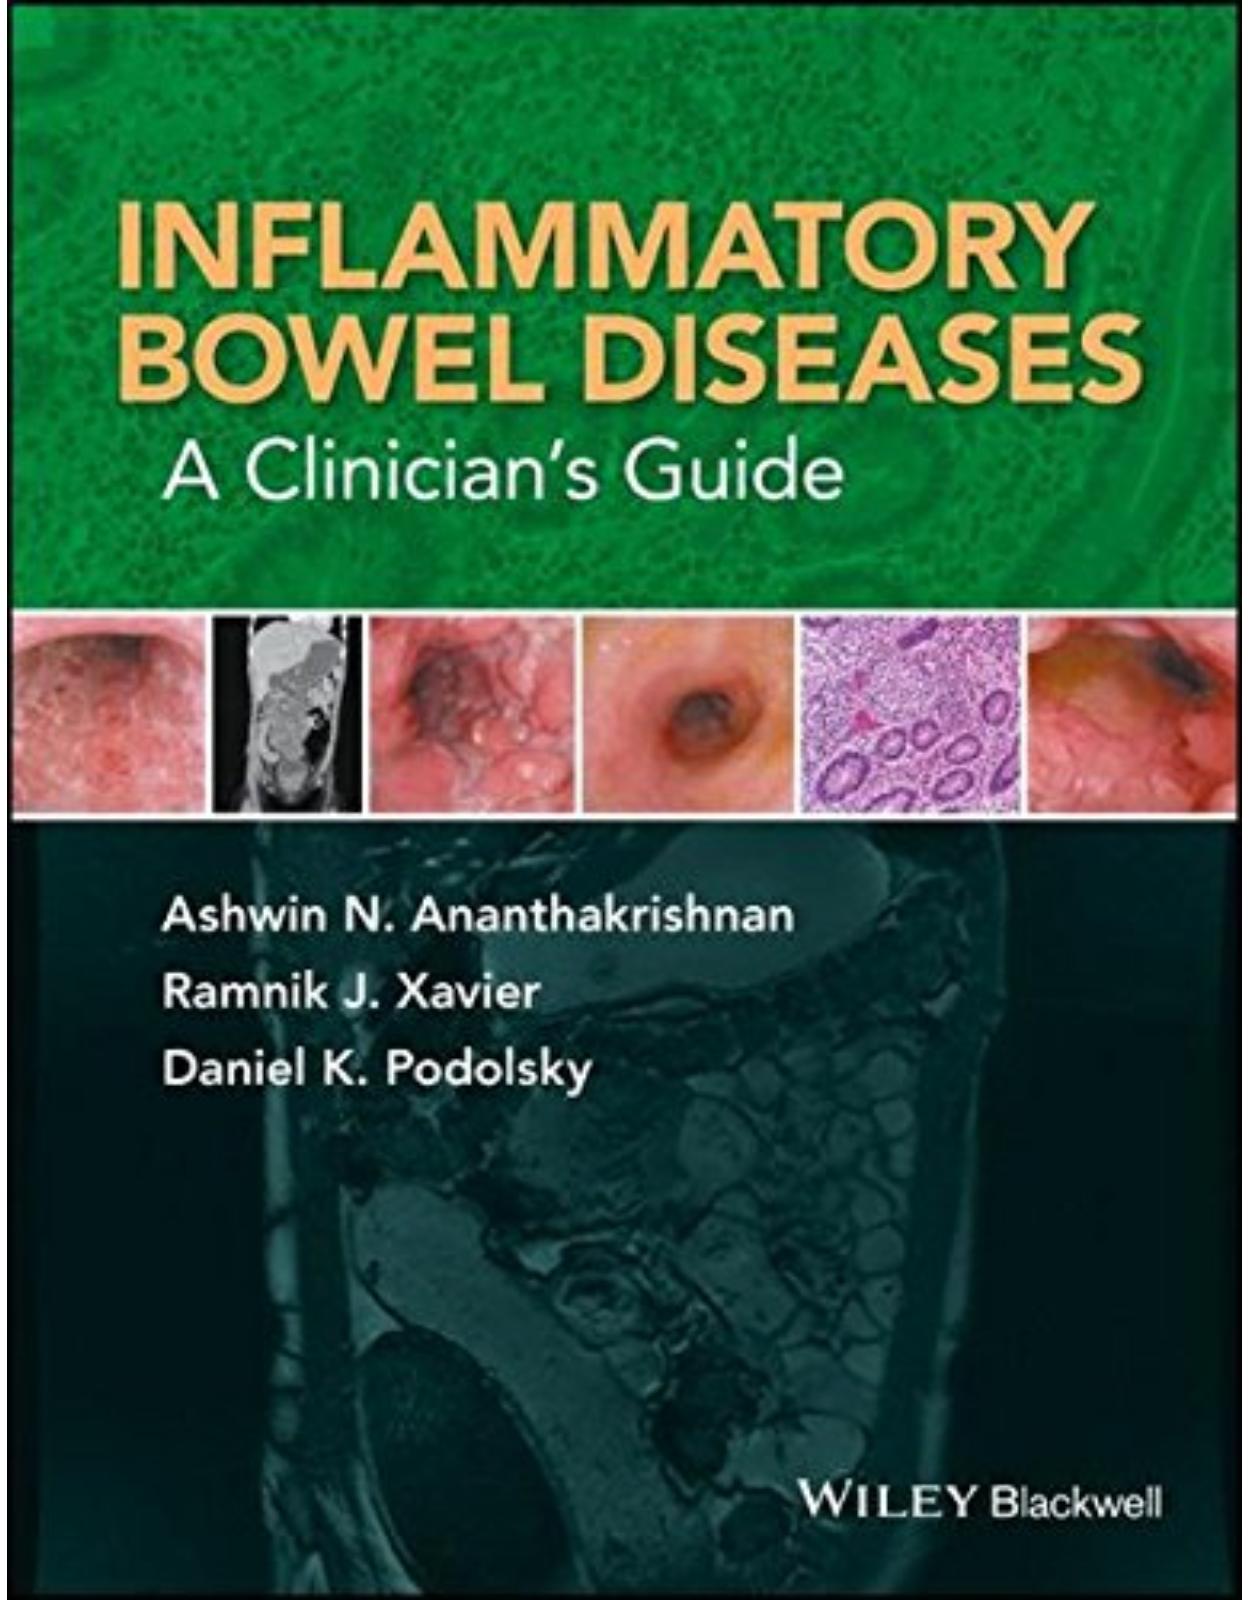 Inflammatory Bowel Diseases: A Clinician’s Guide